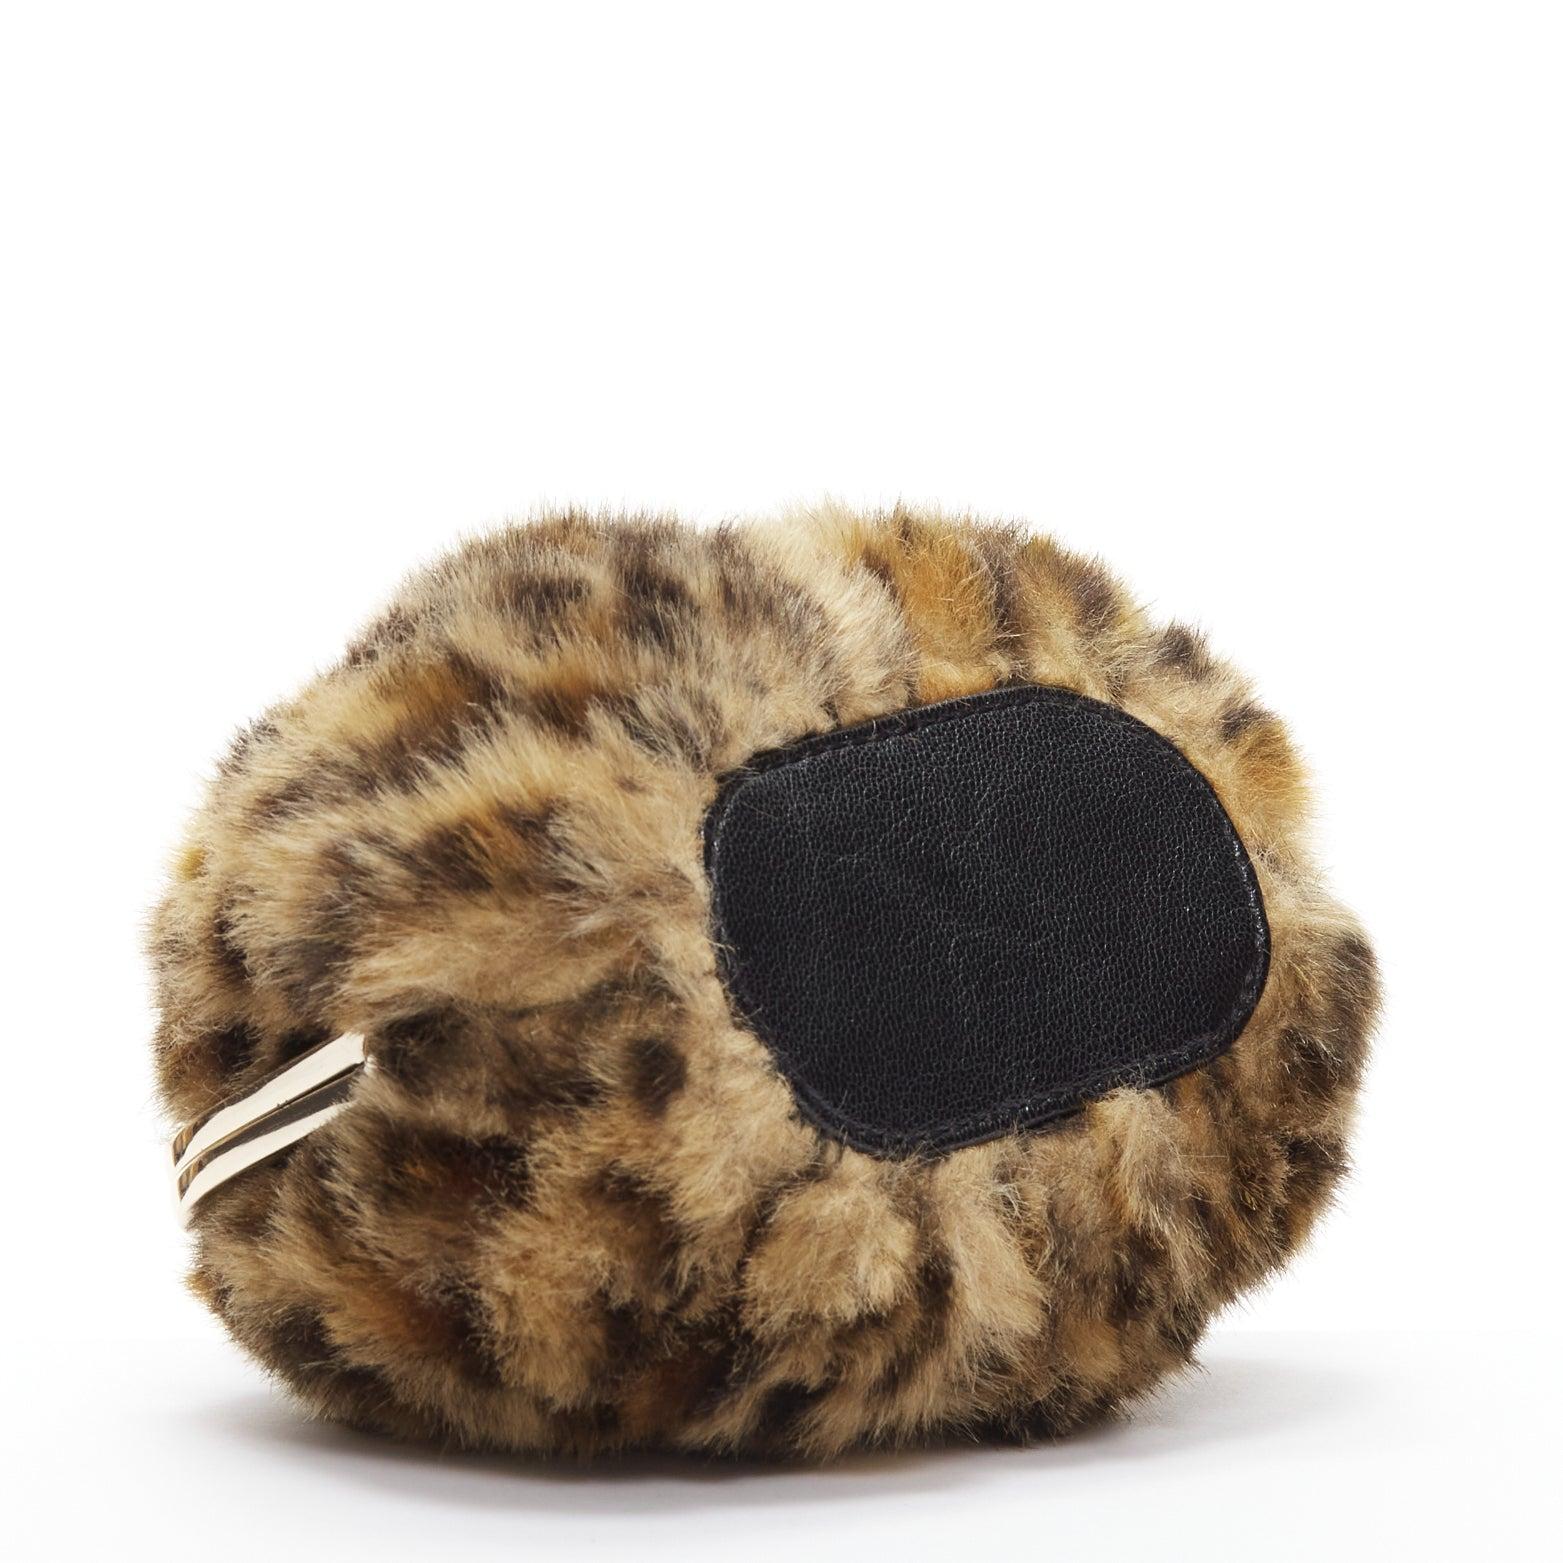 KATE SPADE brown leopard print faux fur gold ball clasp crossbody evening bag For Sale 1